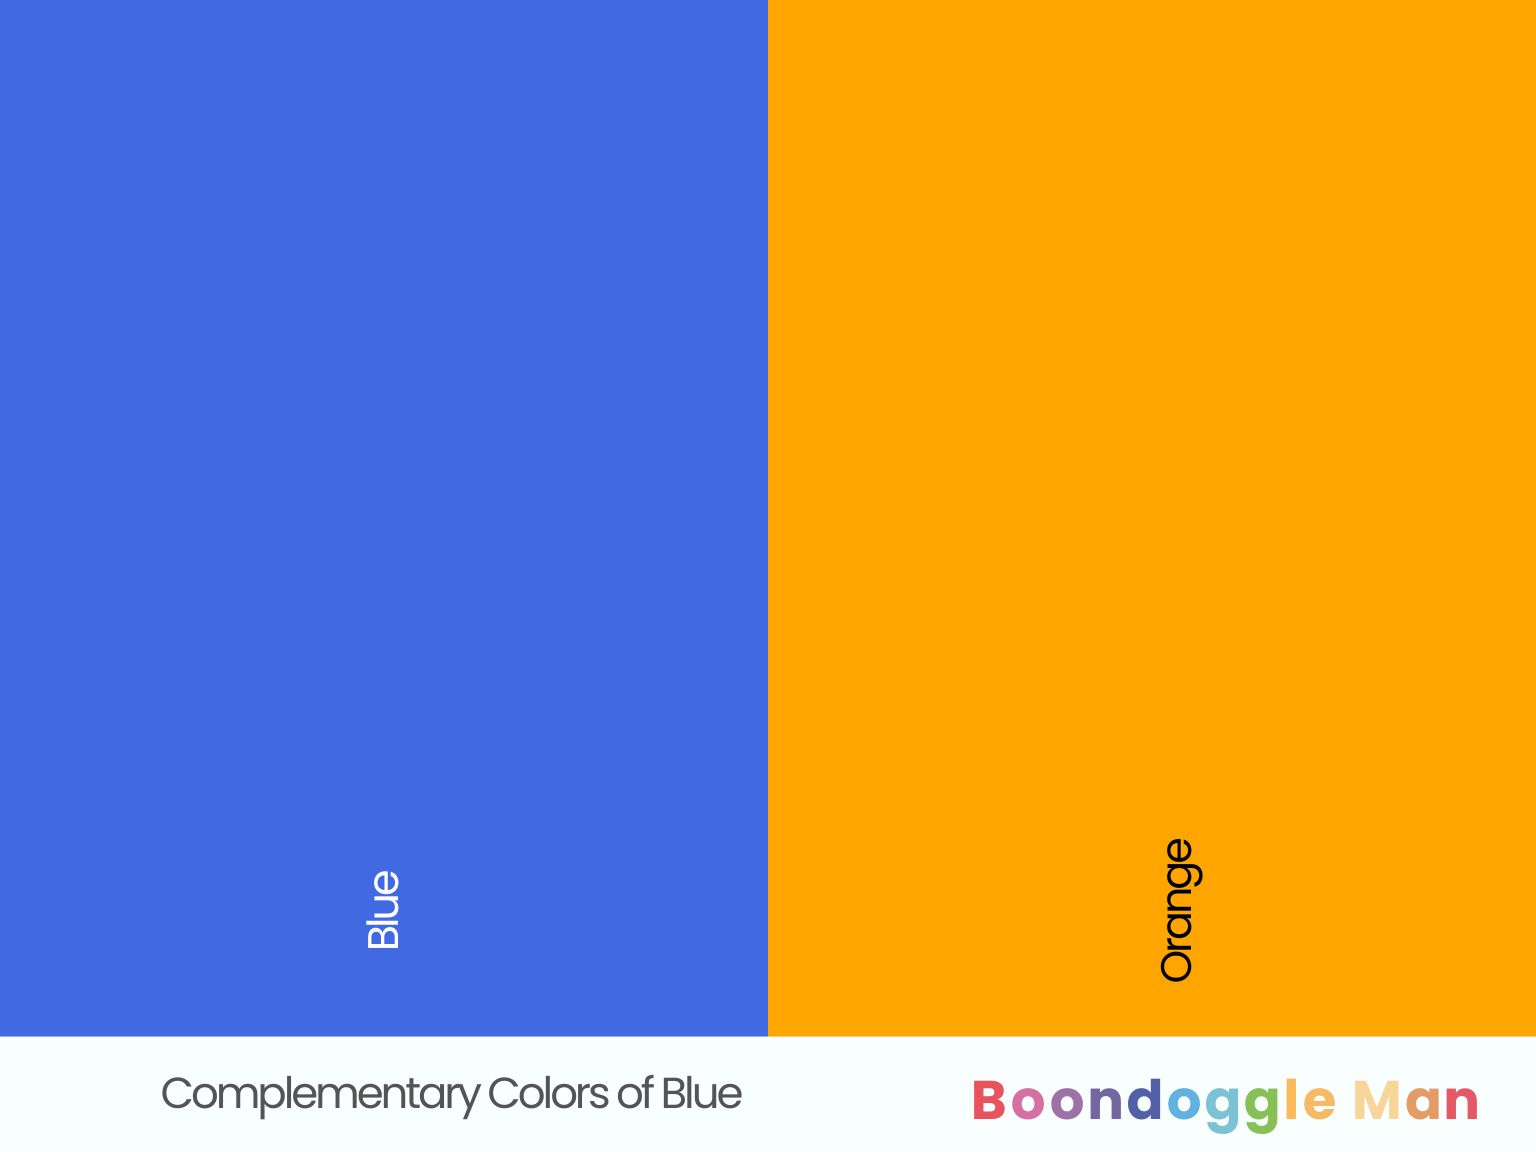 Complementary Colors of Blue